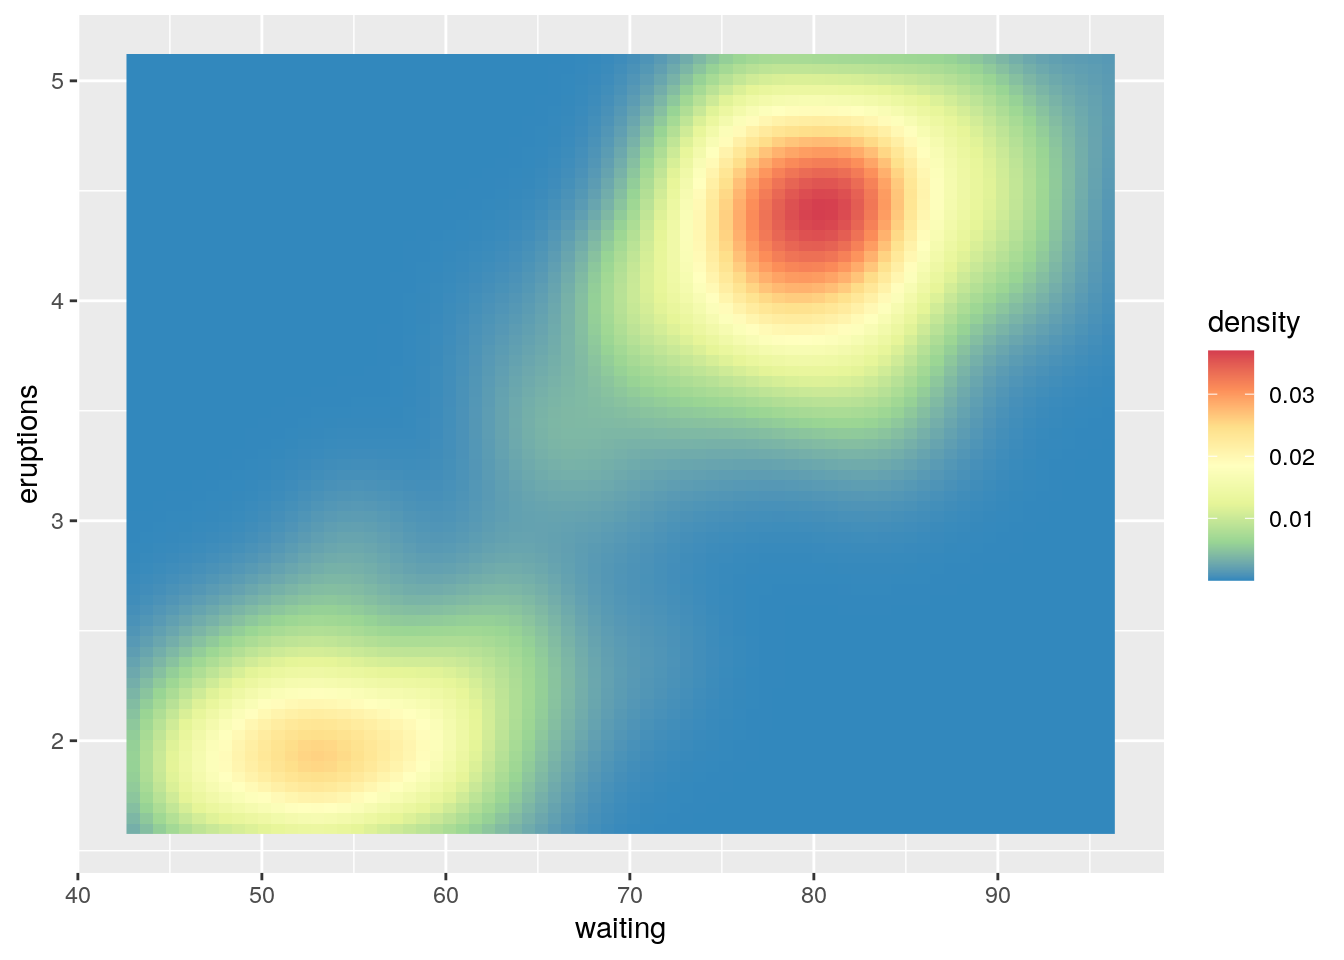 Awesome plot using R.